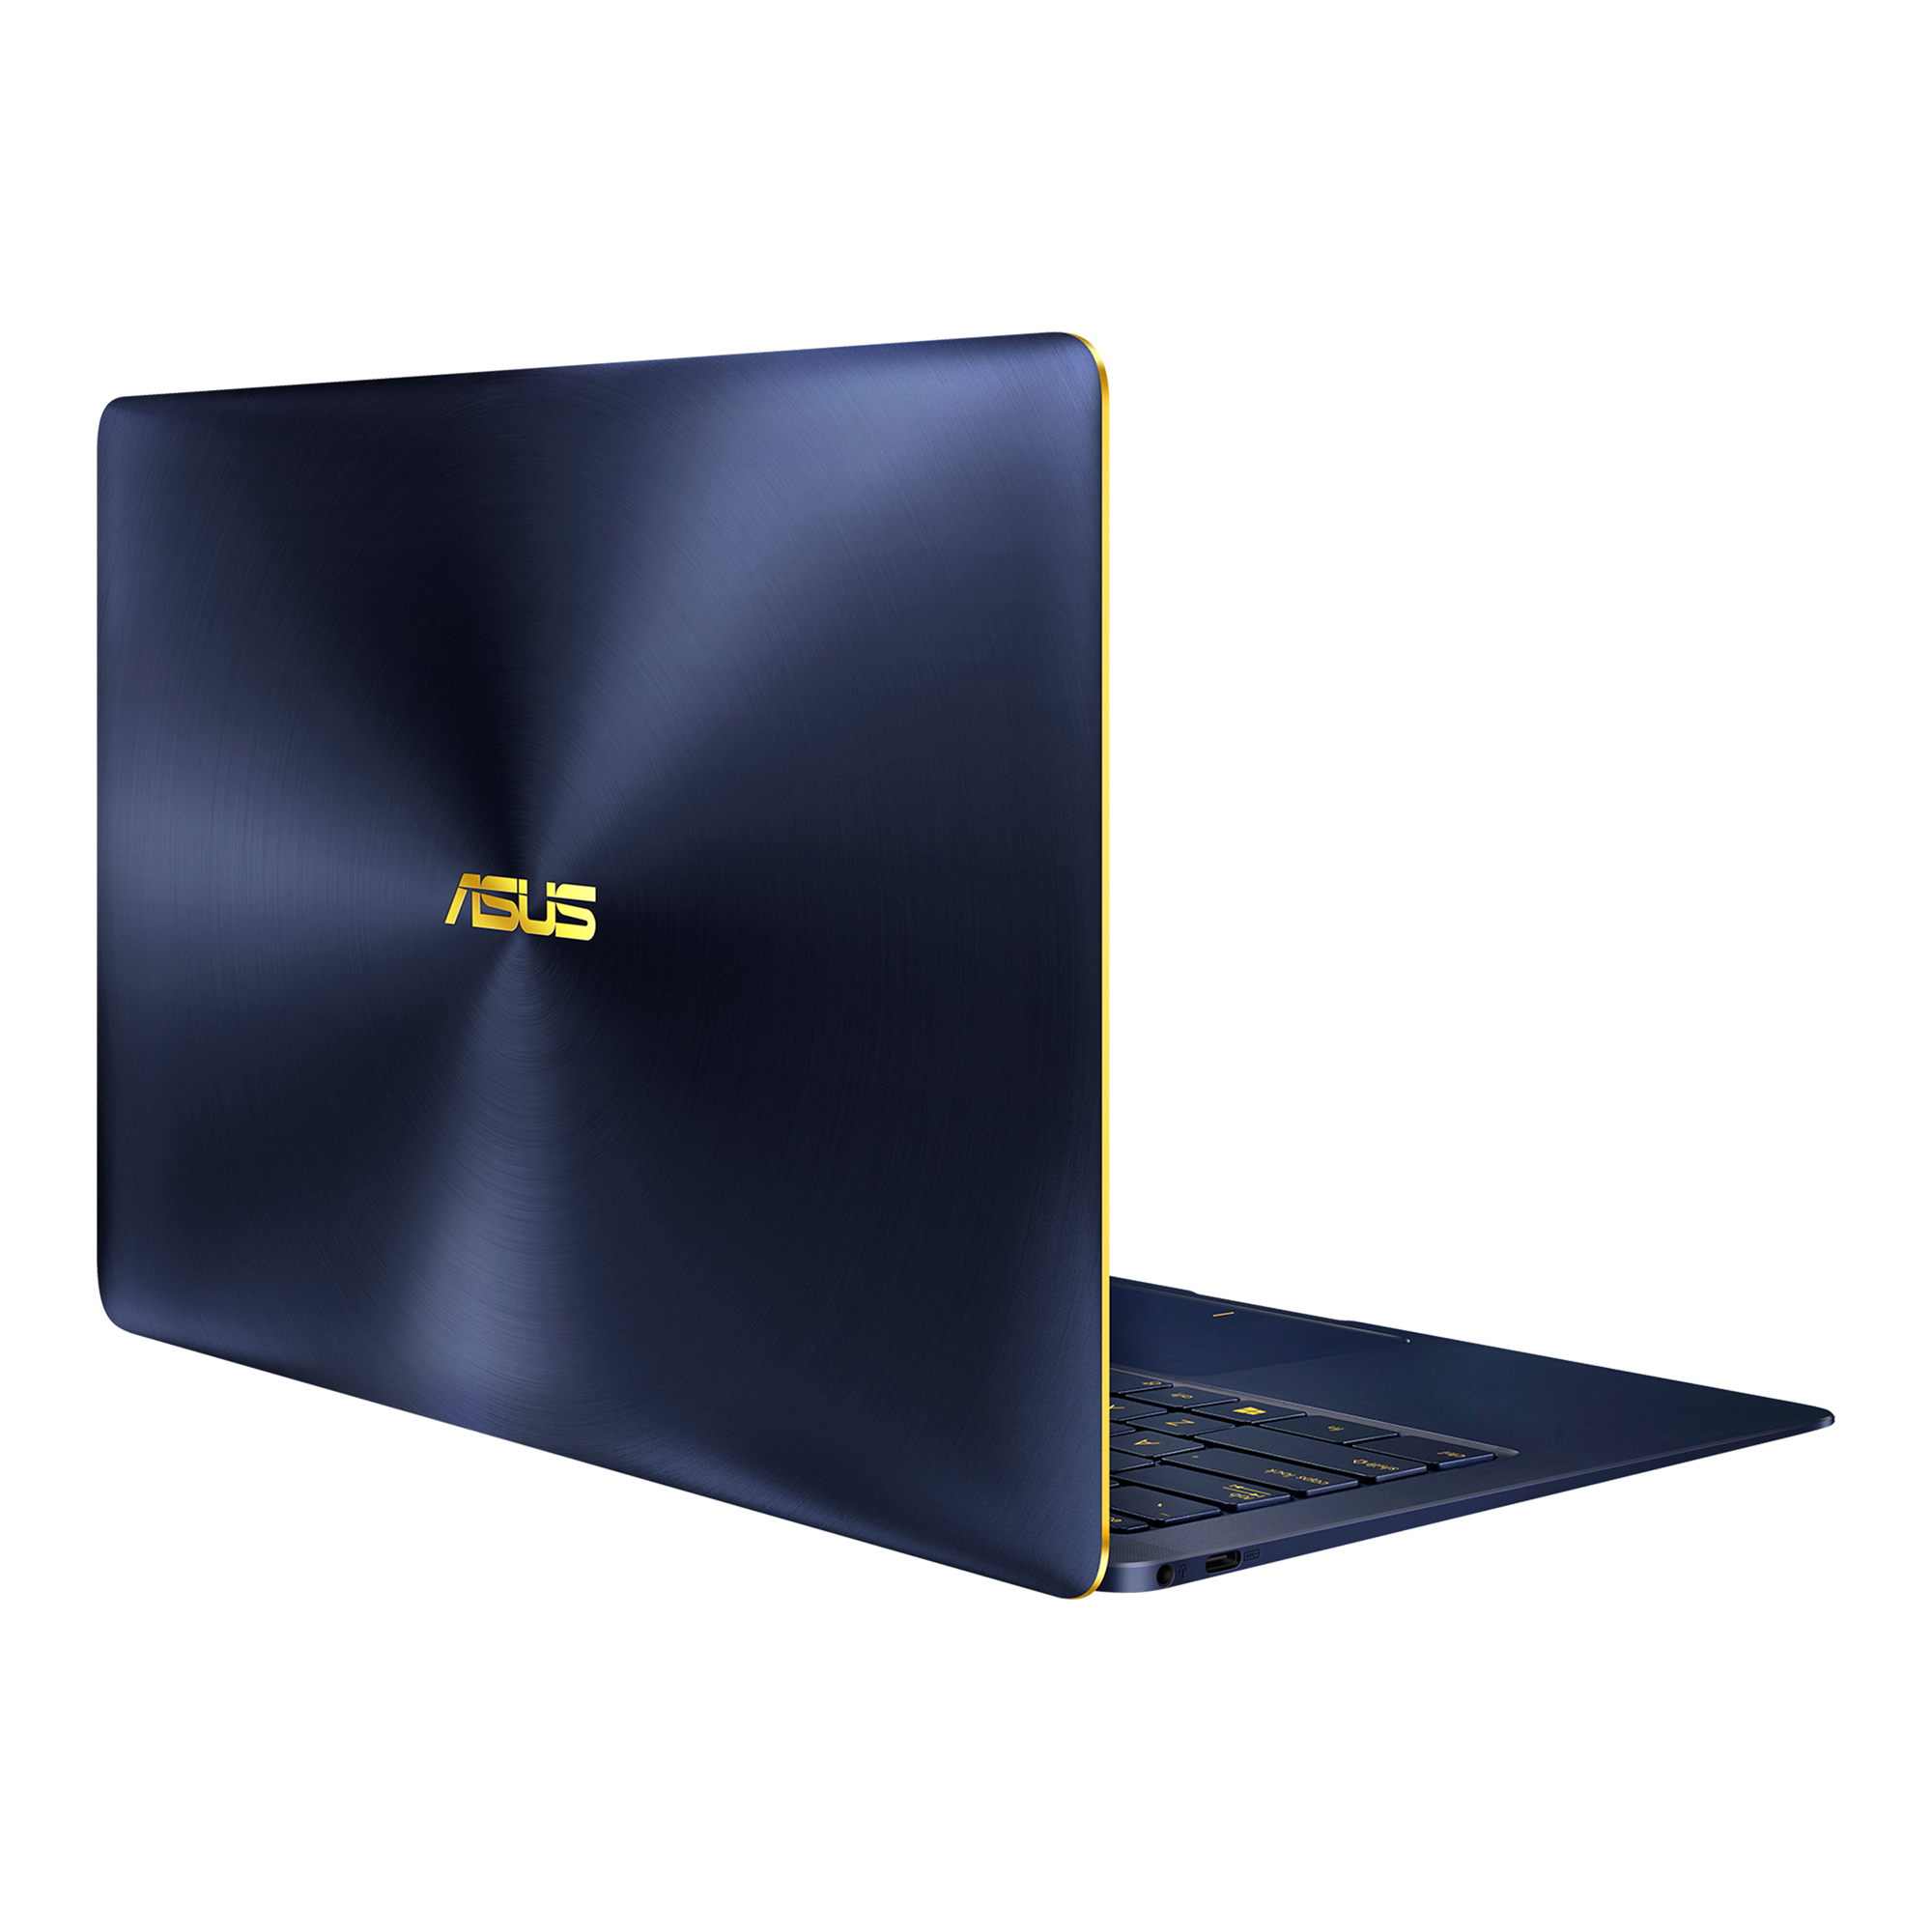 ASUS Zenbook 3 Deluxe UX490｜Laptops For Home｜ASUS USA